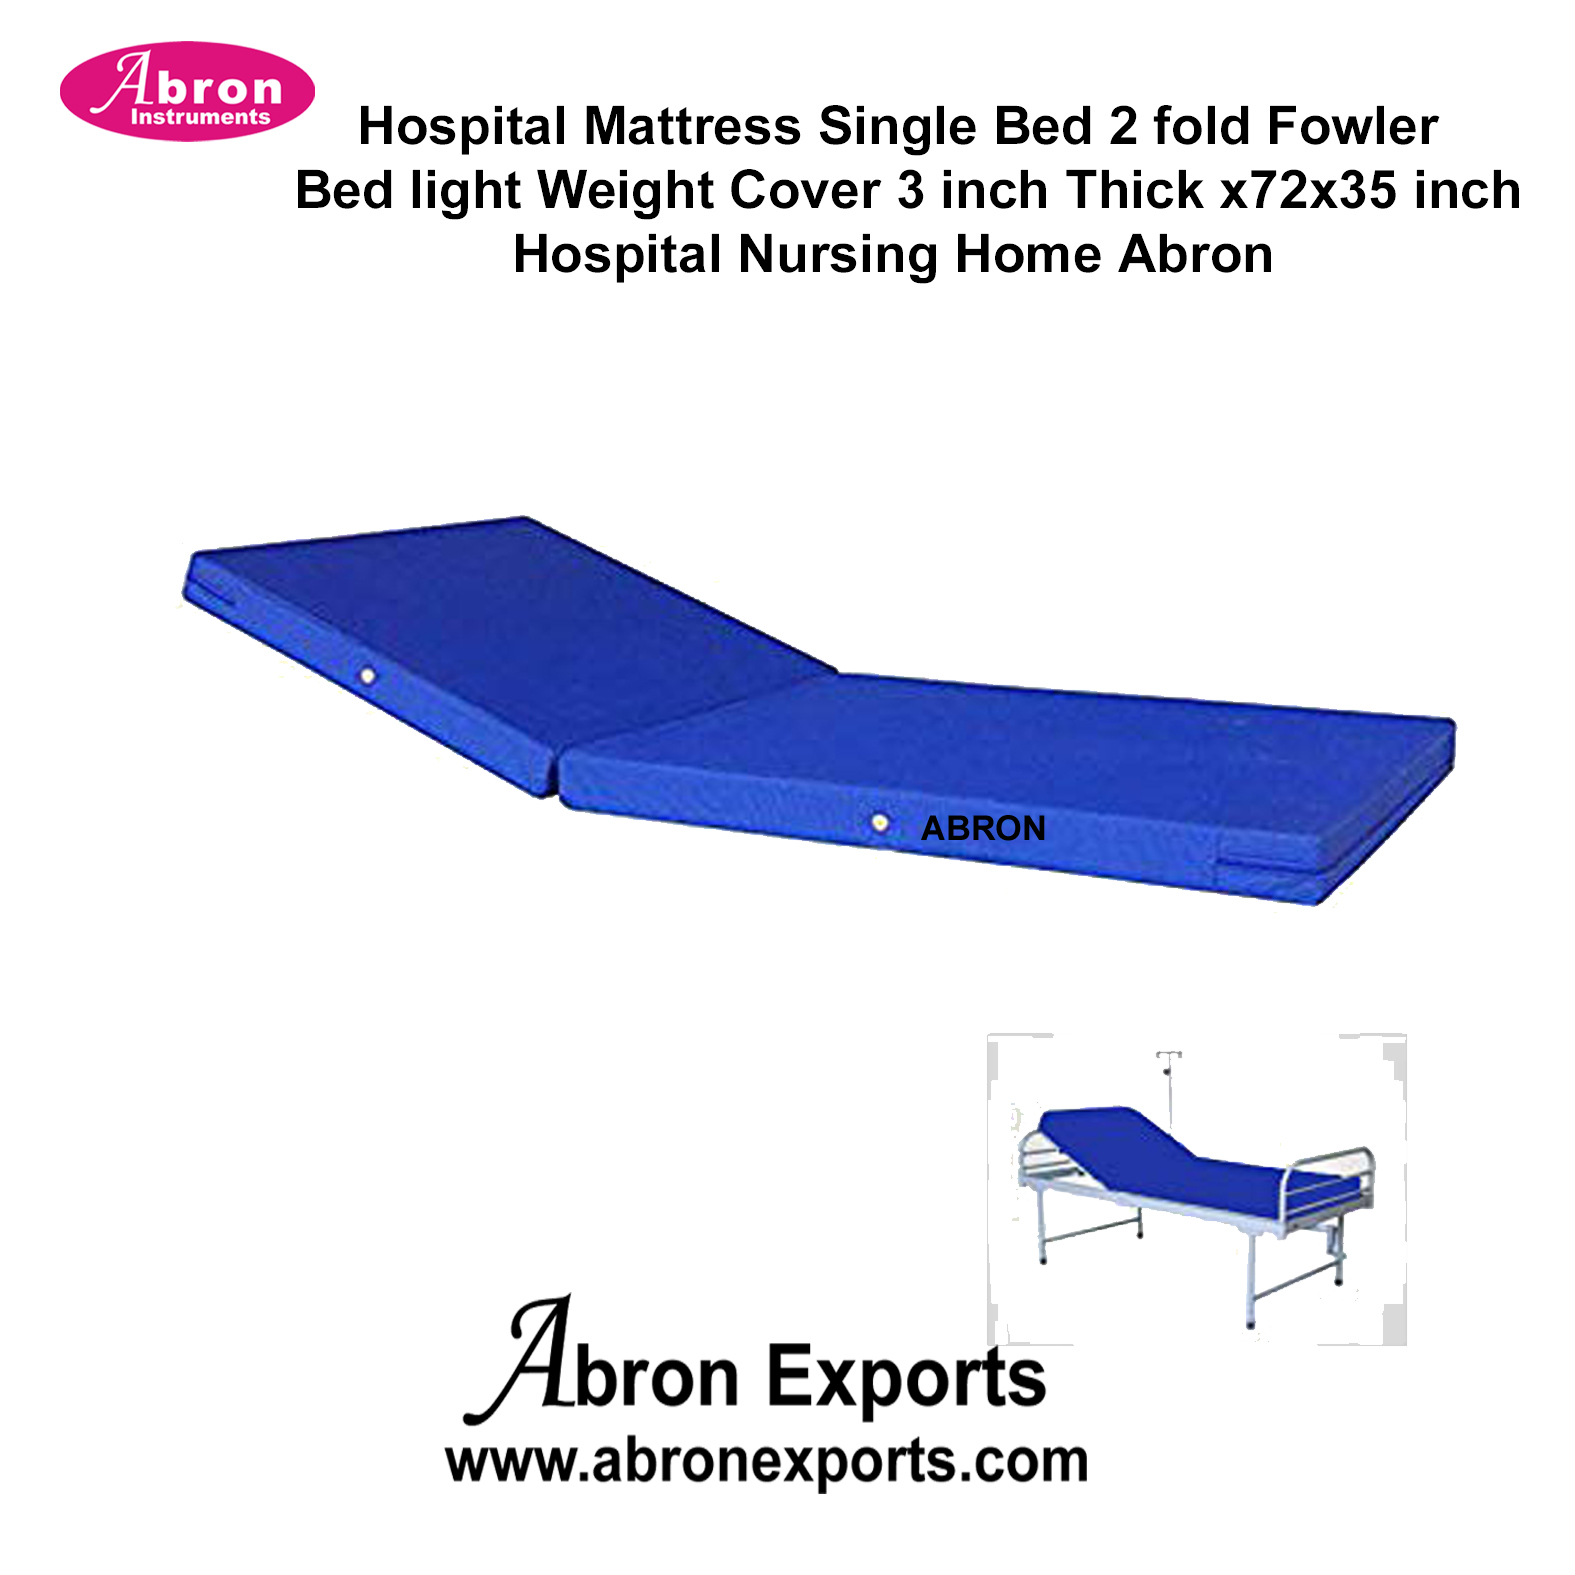 Hospital Mattress Signle Bed 2 fold Fowler Bed Light Weight Cover 3inch Thick x72x35inch Hospital Nursing Home Abron ABM-2264M2F 